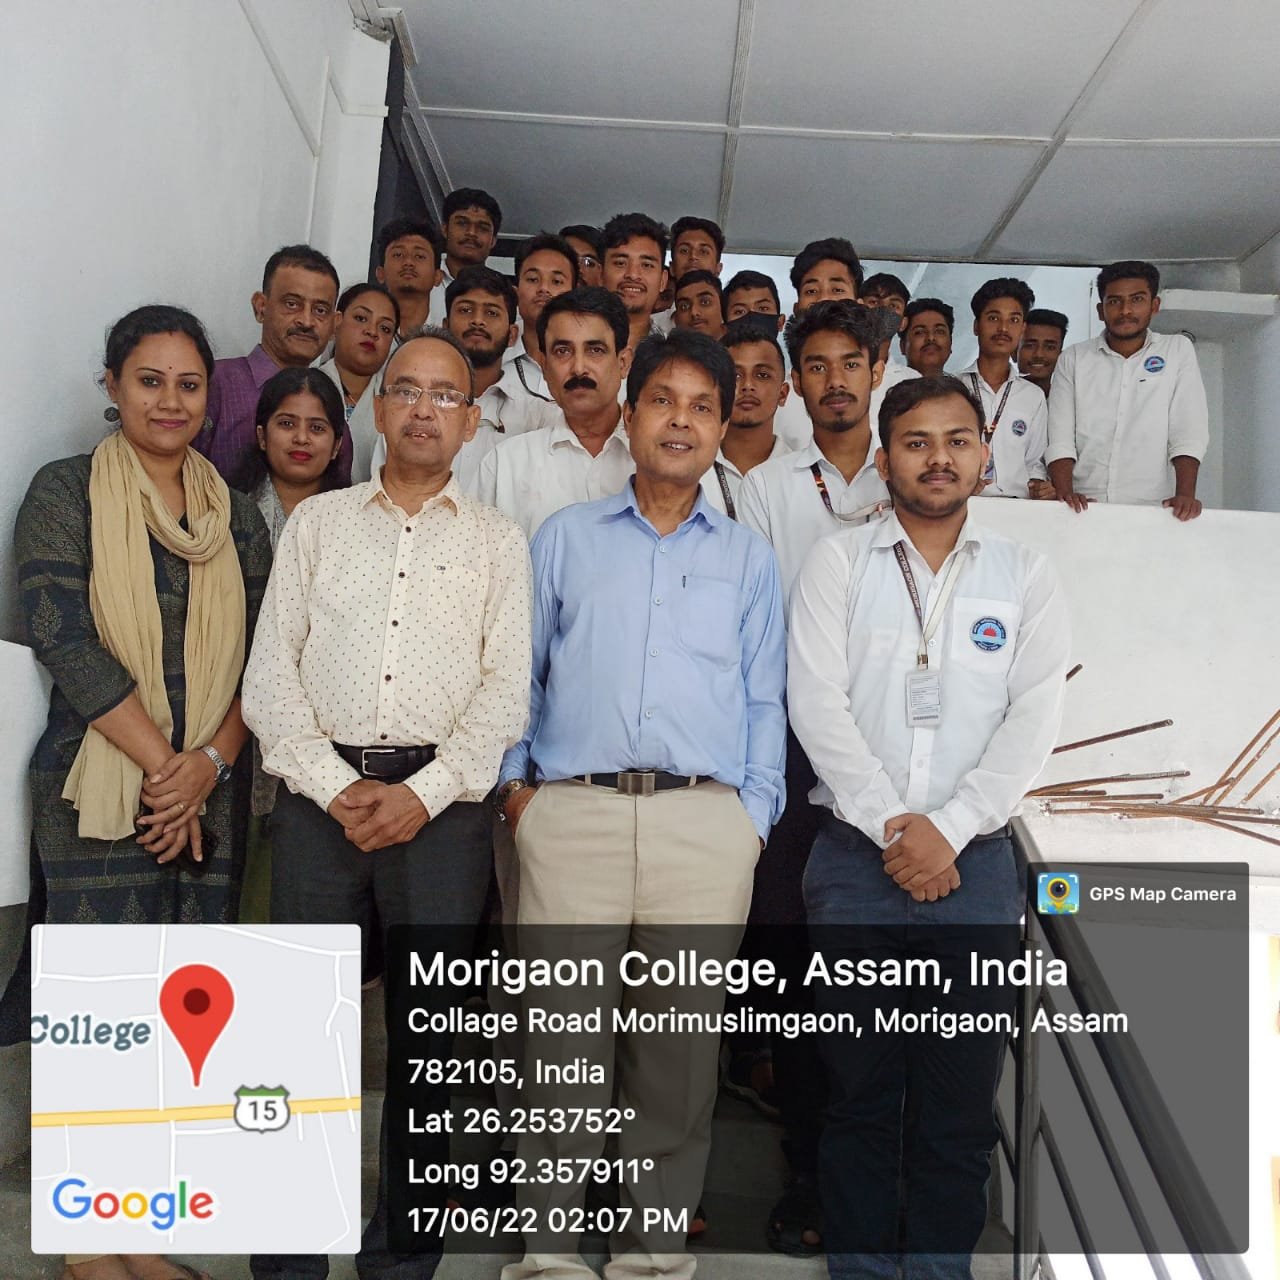 STUDENTS AND FACULTIES WITH GB PRESIDENT AND PRINCIPAL